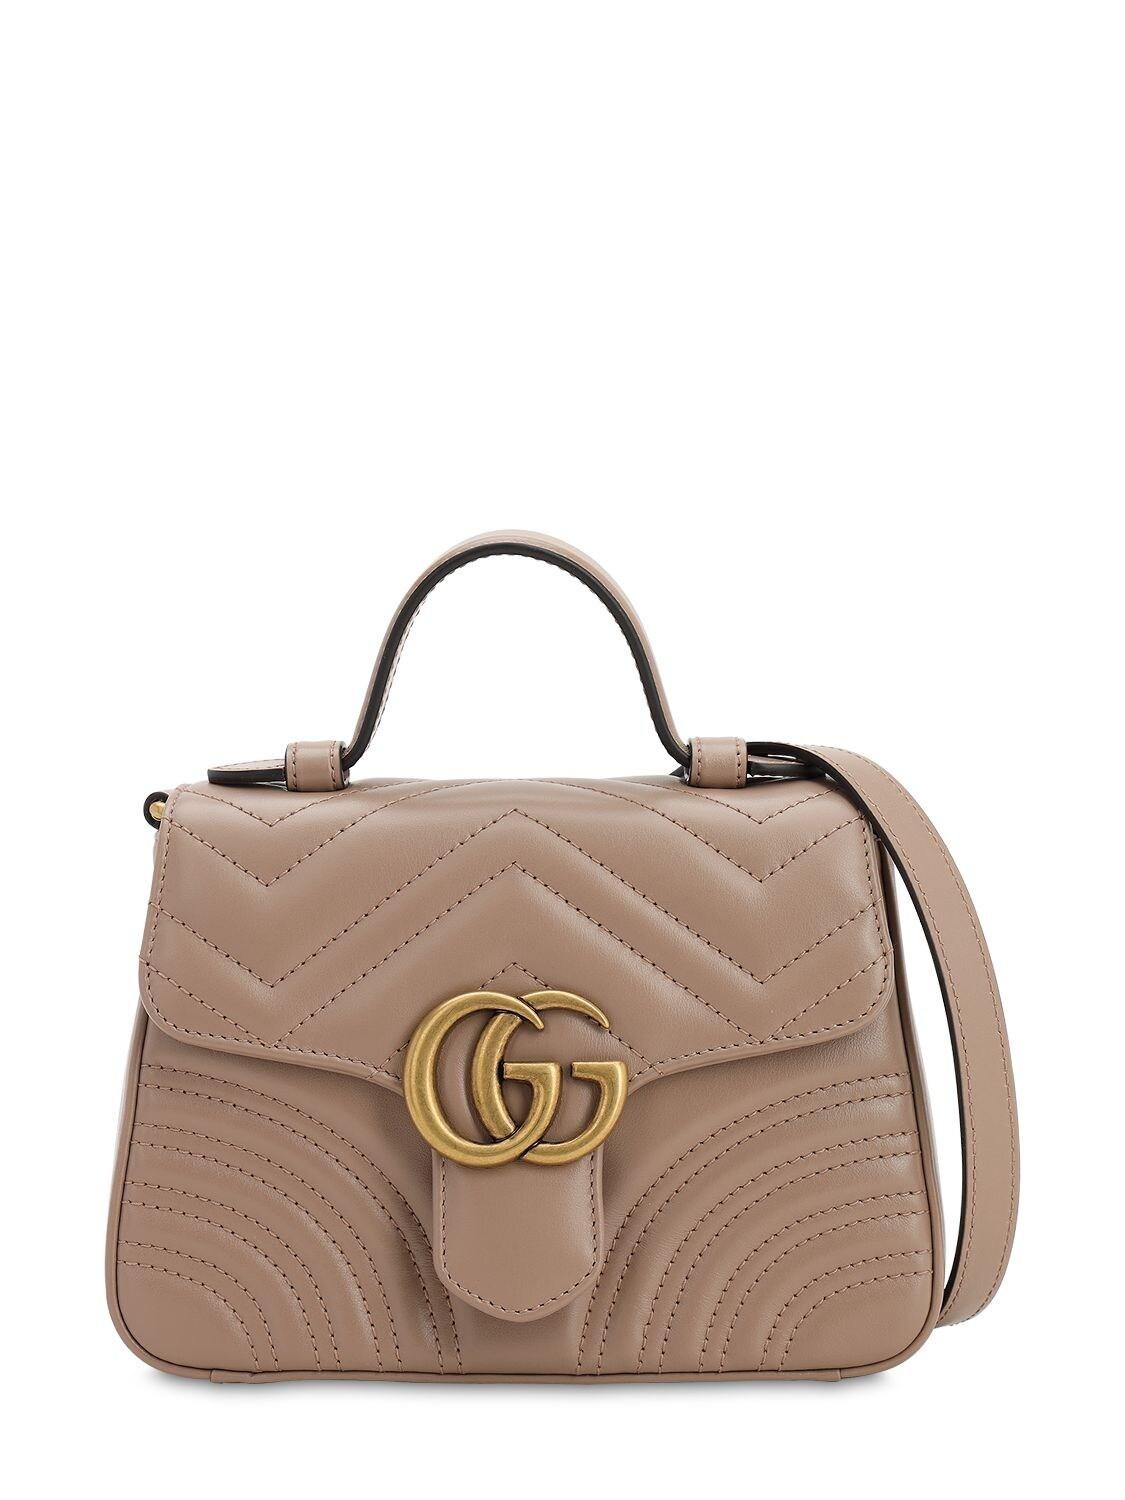 gucci marmont small top handle bag